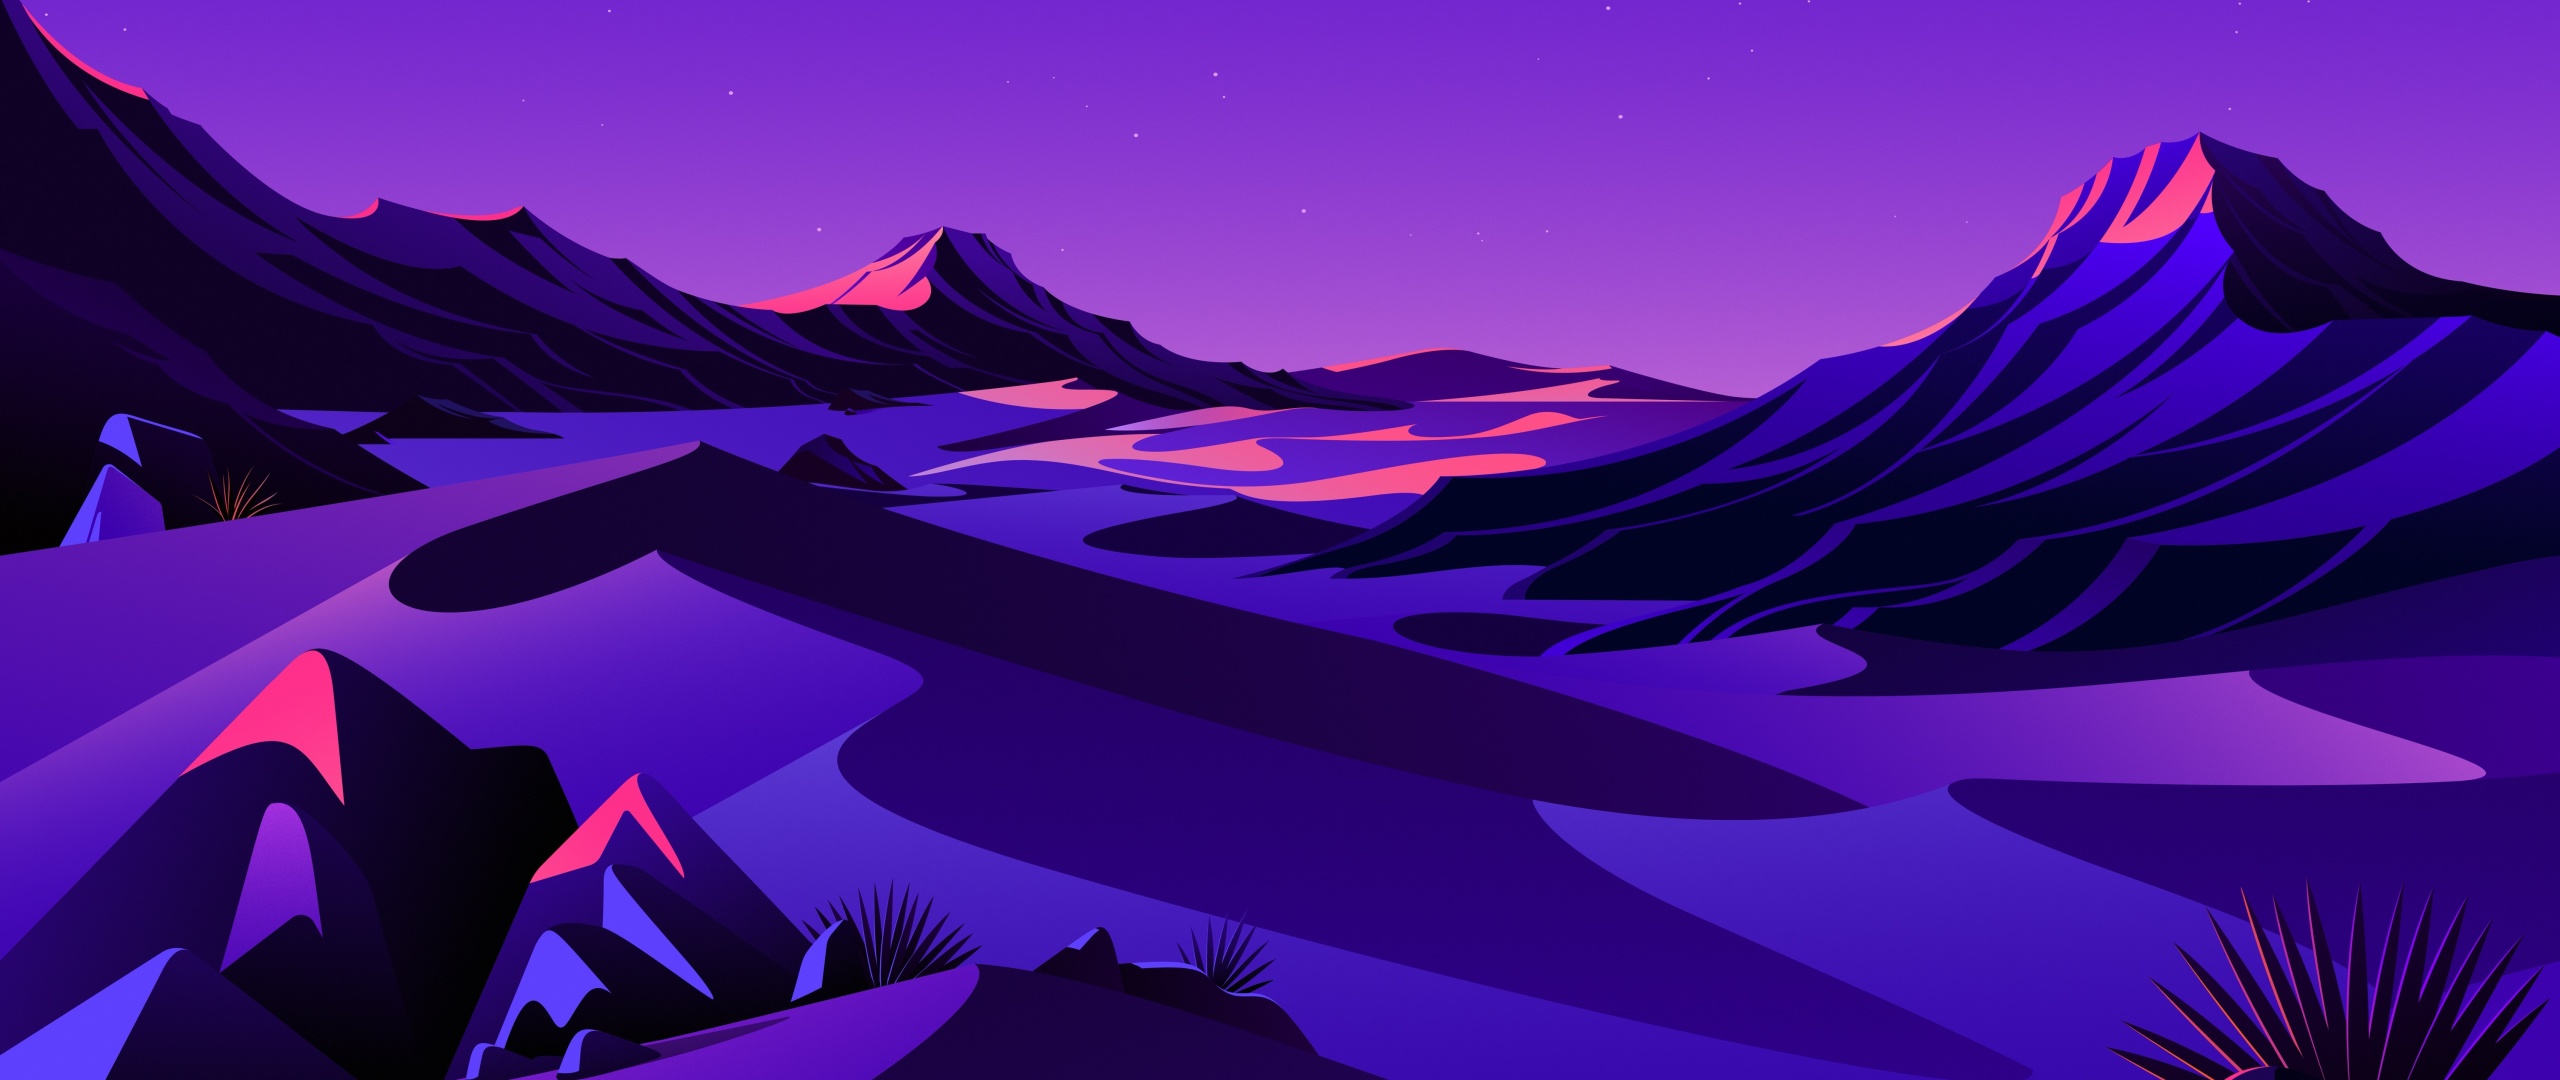 Free download Purple wallpaper 2560x1080 For your ultrawide monitor